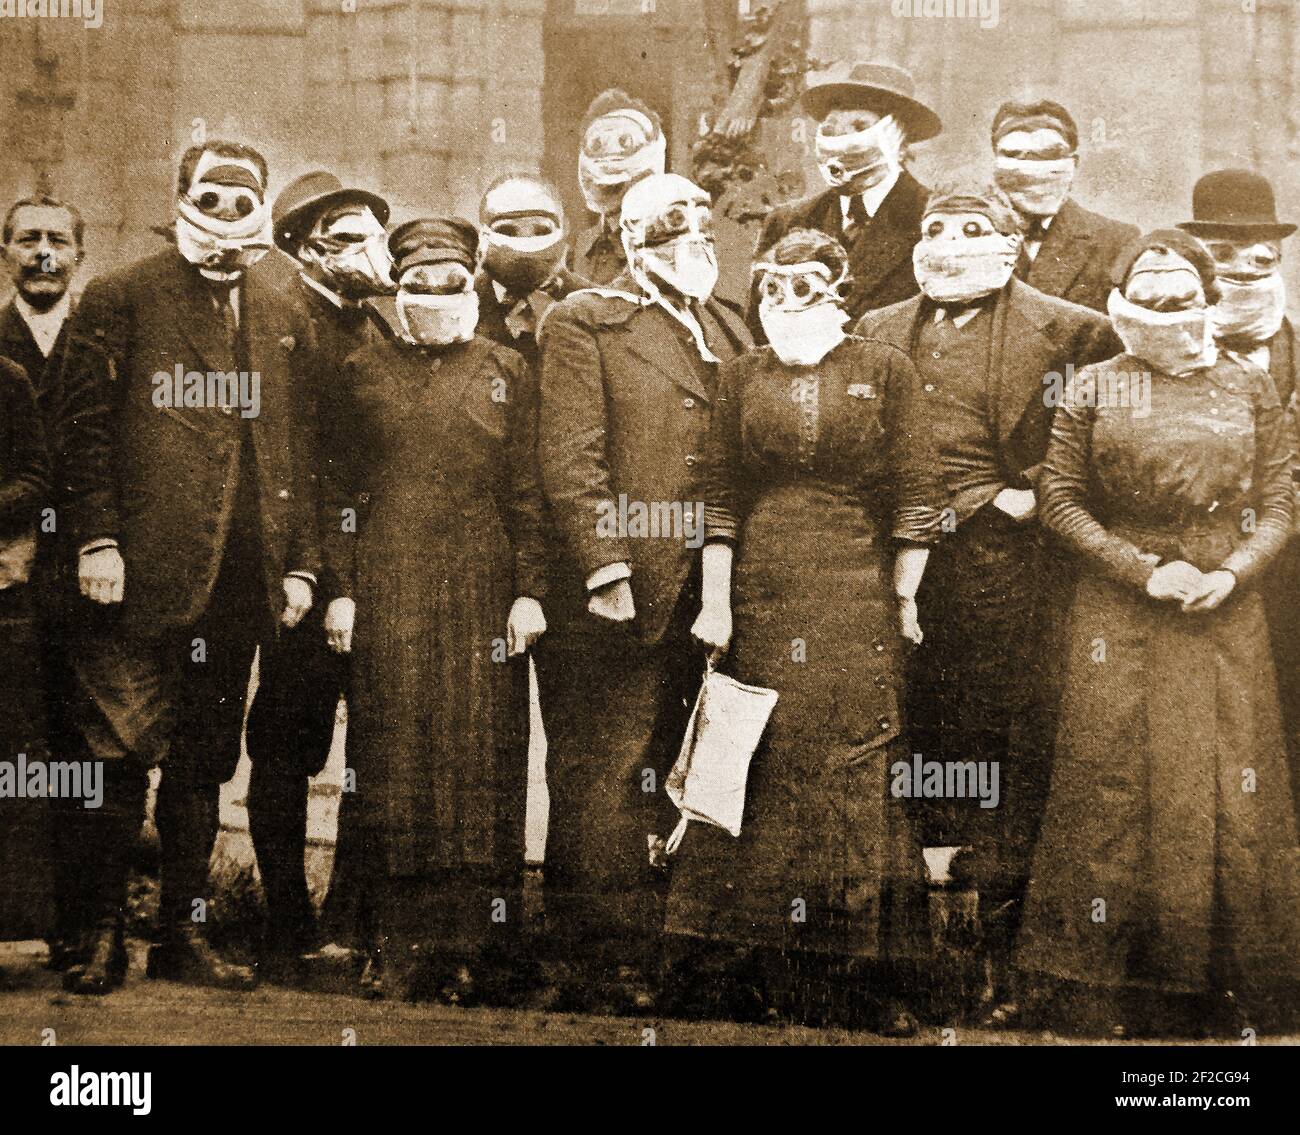 WWI - The Mayor & City Council of Rheims aka Reims  (Dr Langlet Mayor - centre) outside the Town Hall wearing anti-gas masks. In World War I   the city was bombarded by the Germans and badly damaged. Stock Photo